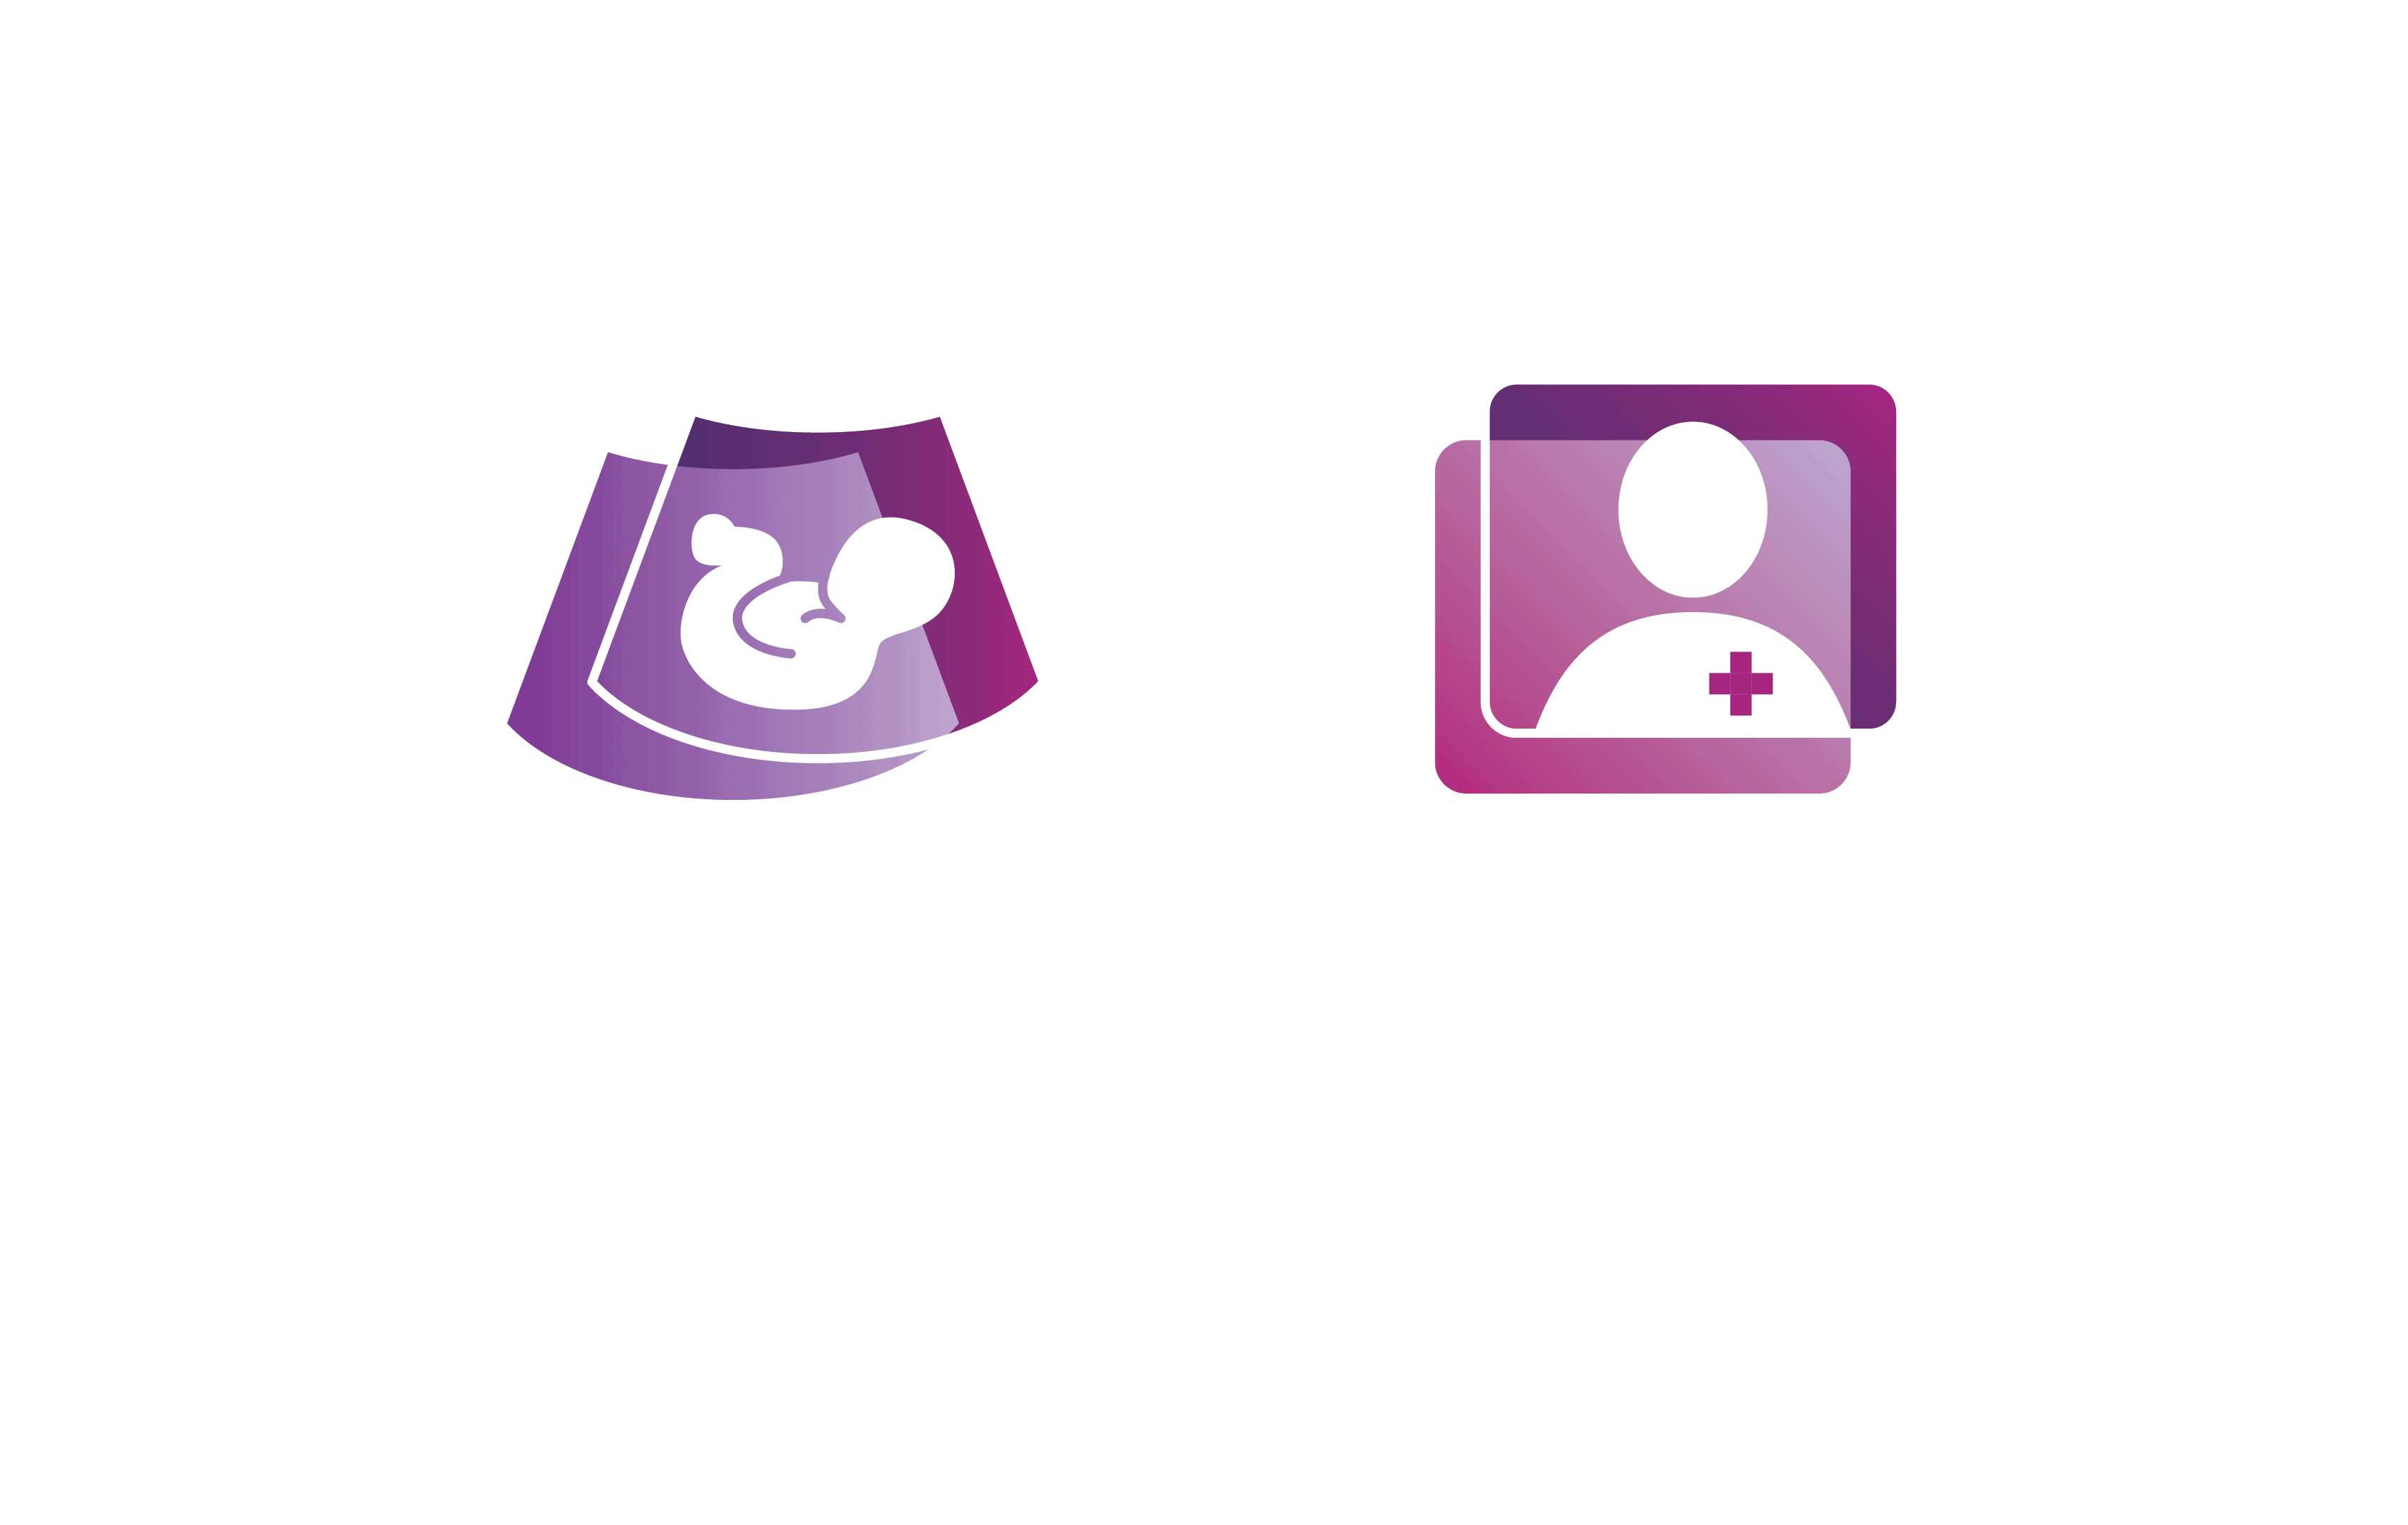 icon of pregnancy and provider with text "Navigator partners with patient to help navigate complex needs"